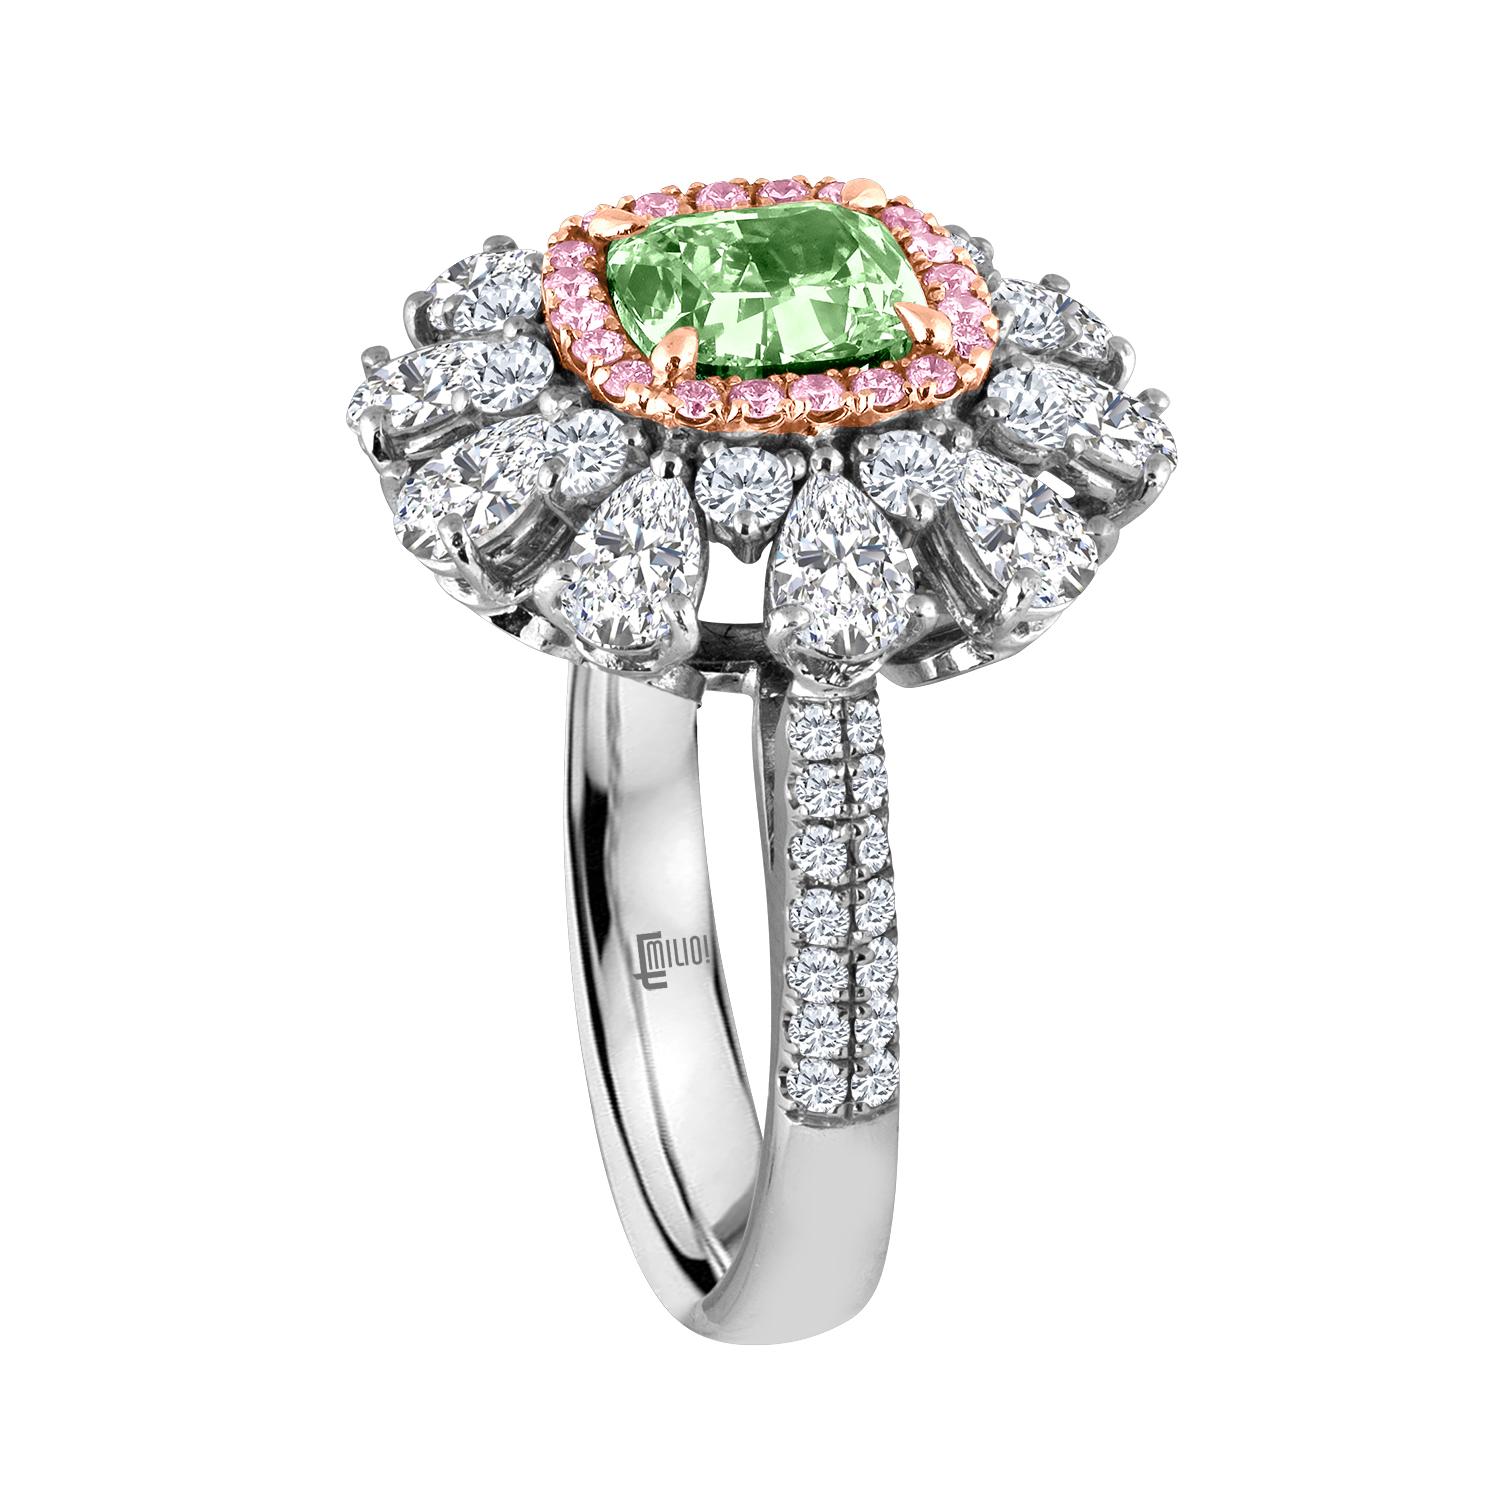 Manufactured in the one and only Emilio Jewelry factory this one and only Green diamond ring is for the person who has everything, except this! Green diamonds are the rarest of all the colors. The center diamond is a natural GIA certified 1.80 carat